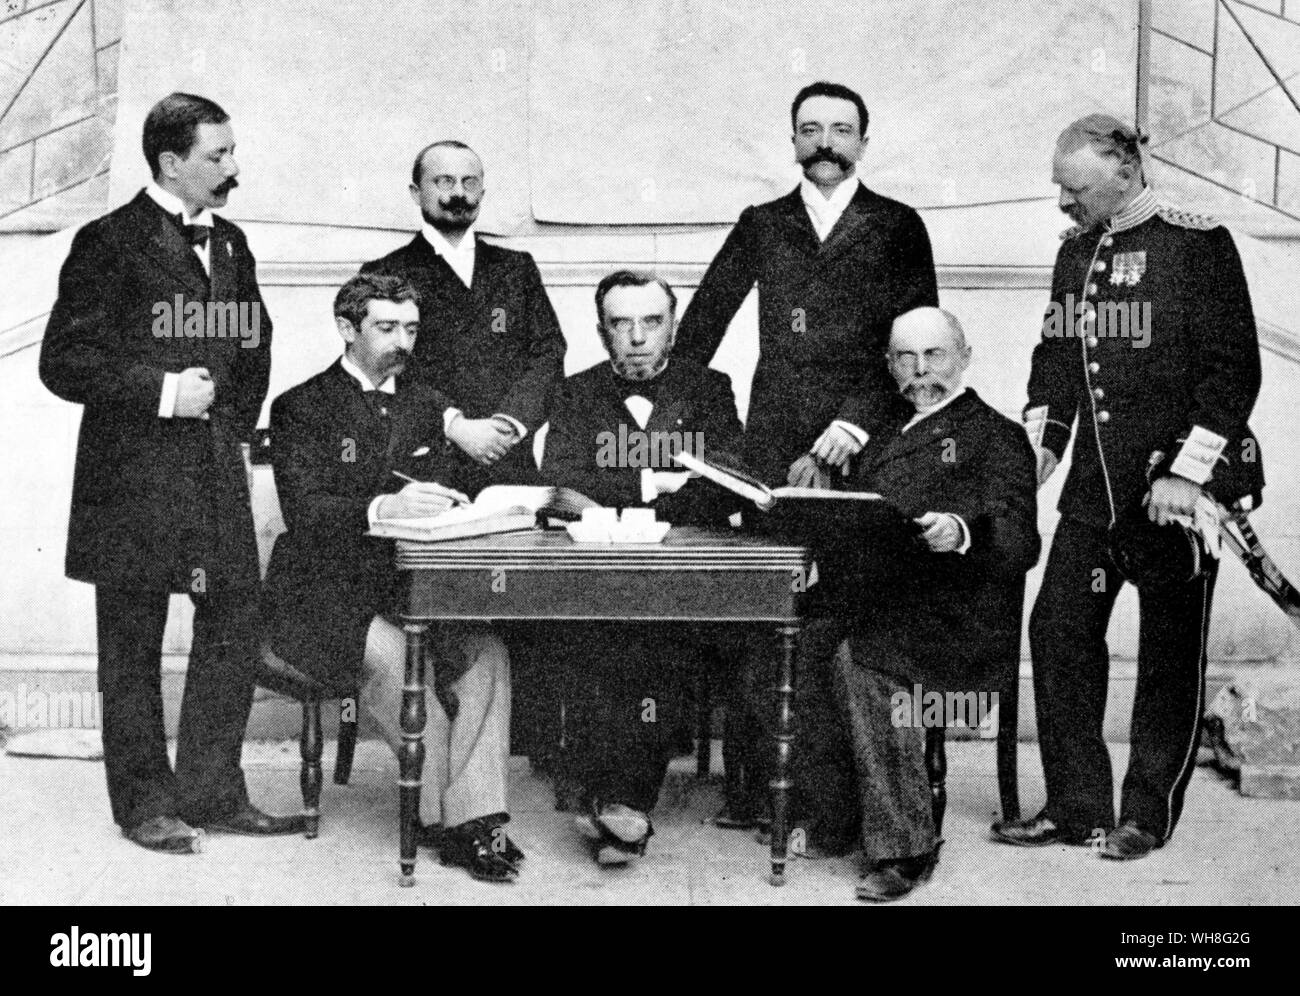 Some of the IOC members present at the 1896 Olympic Games, first meeting of the International Olympic Organizing Committee. They are, seated left to right, Baron Pierre de Coubertin (France), President Dimitros Vikelas (Greece) and Aleksei Botovsky (USSR). Standing left to right, Dr Willabald Gebhardt (Germany), Jiri Guthjarkovsky (Czechoslovakia), Francois Kemery (Hungary) and General Viktor Balck (Sweden). The Olympic Games page 23. Stock Photo